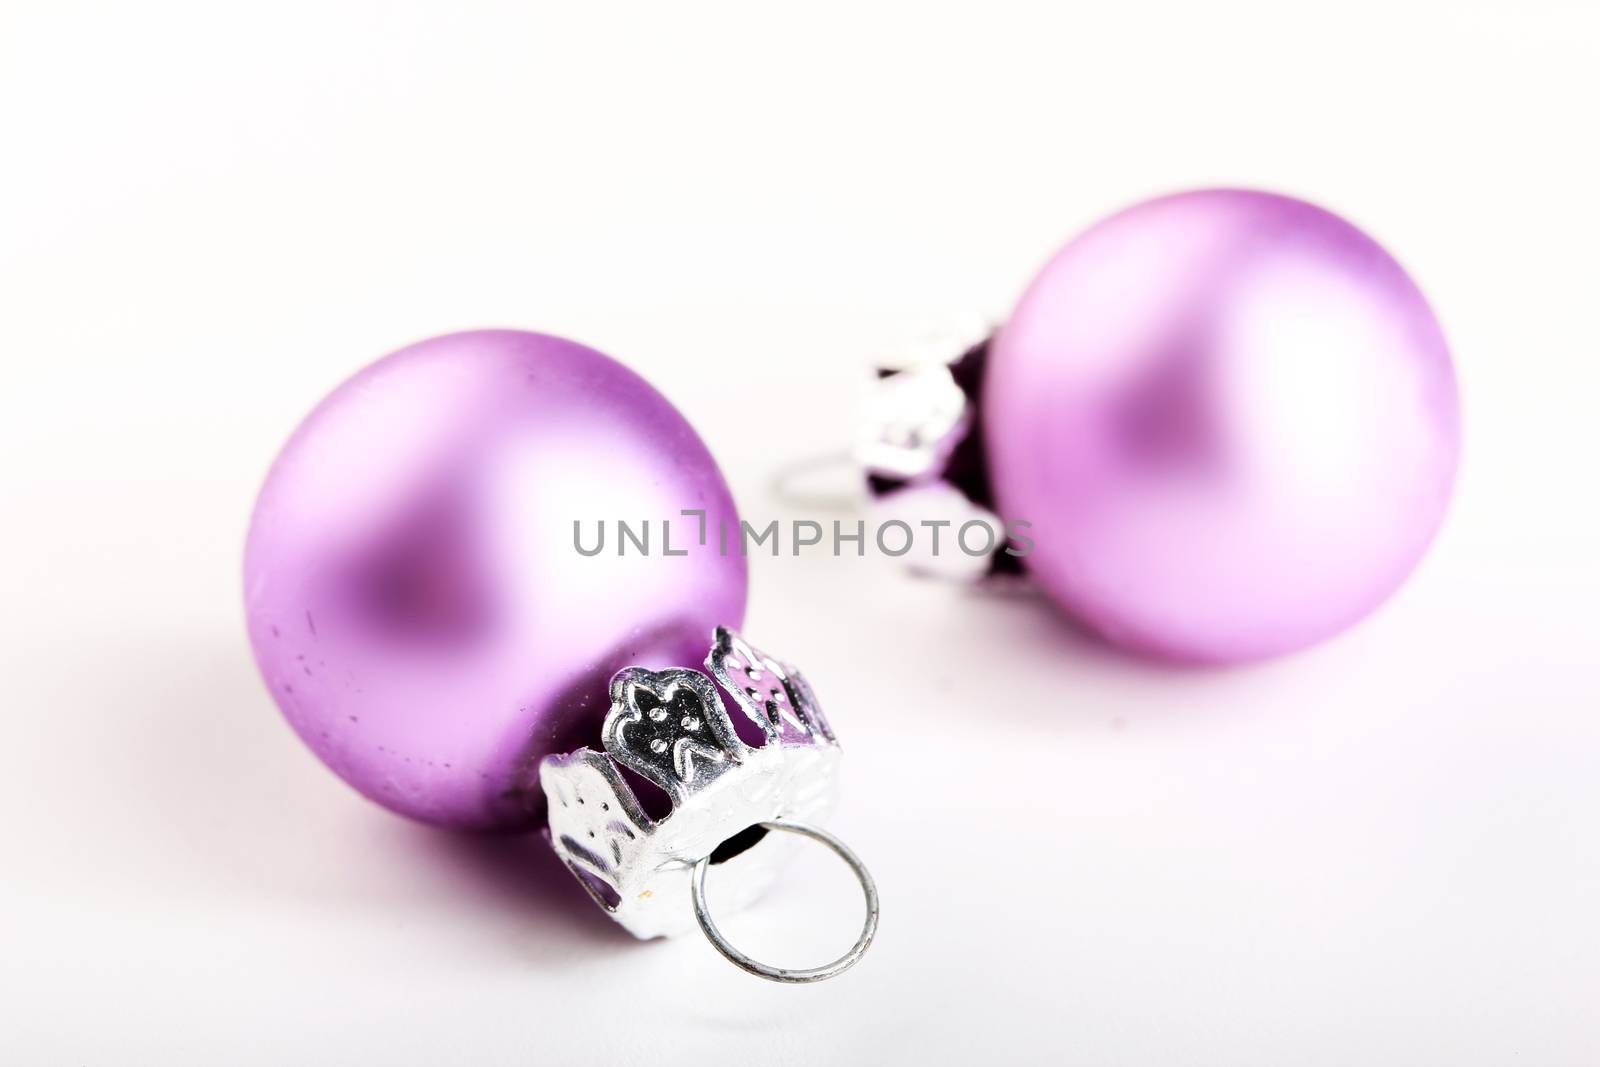 christmas ornaments violet by Tomjac1980